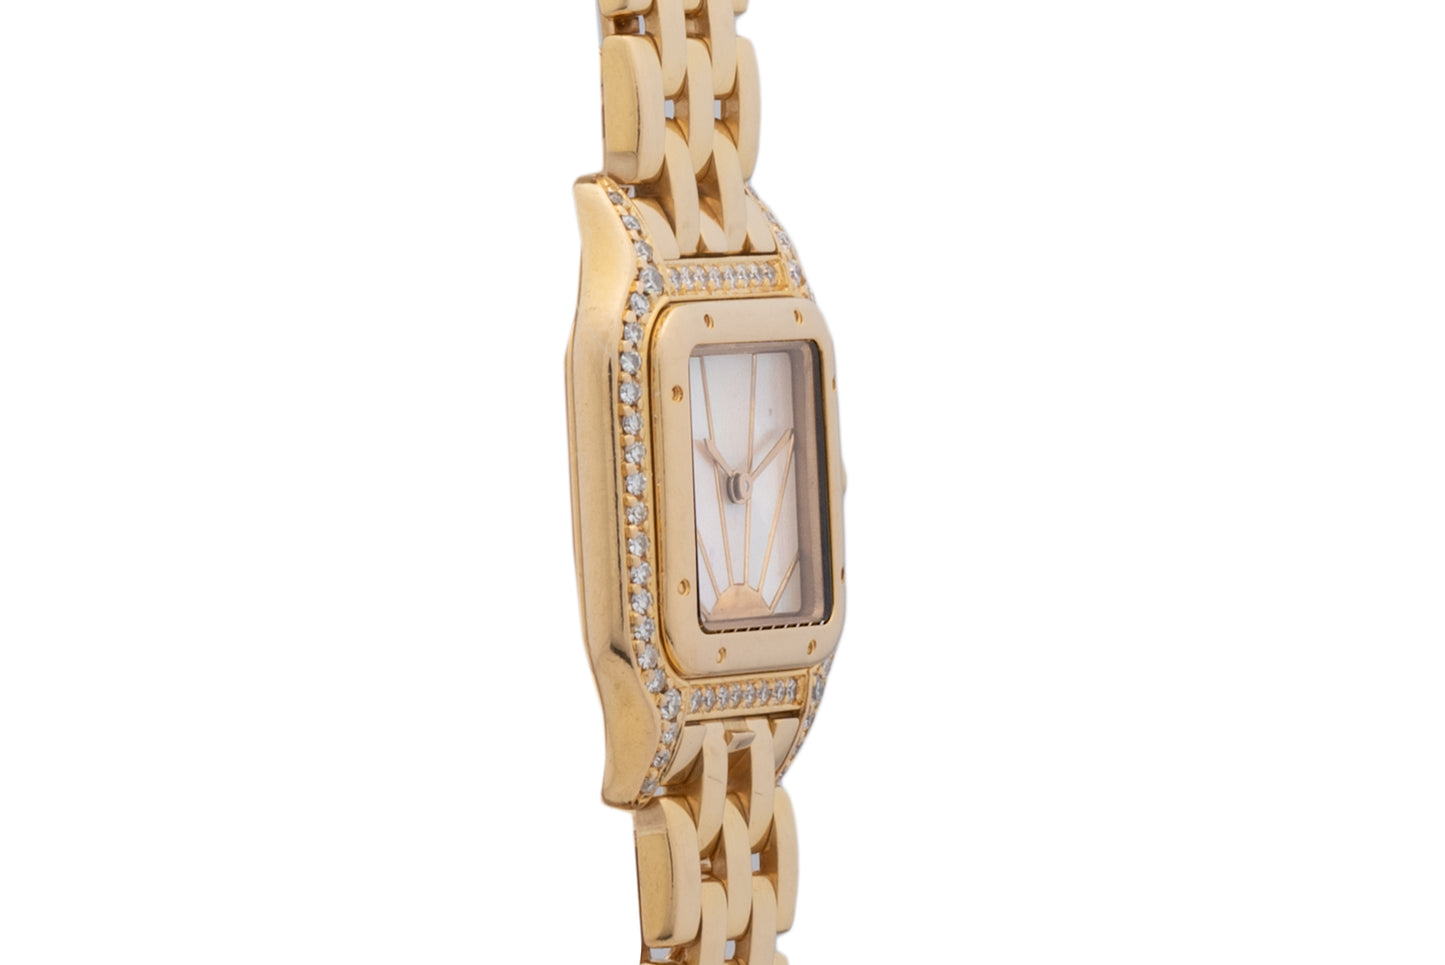 Cartier Panthère Mother of Pearl 'Sunrise'